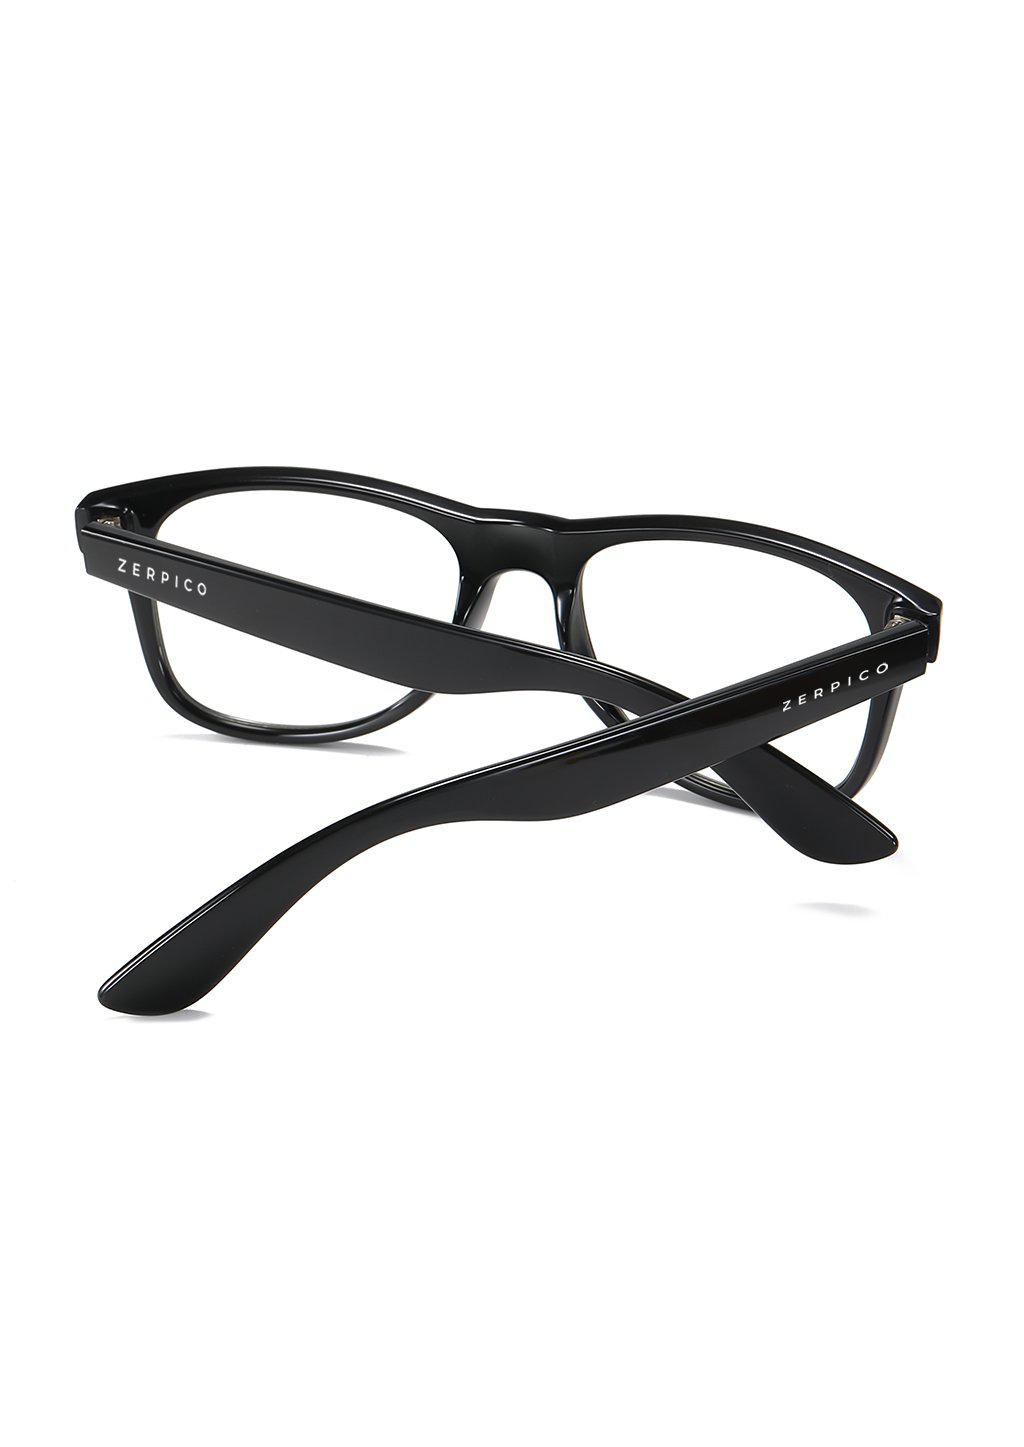 Xenon Photochromic anti bluelight clubmaster glasses that work like two in one. Turns dark in the sun and clear inside.